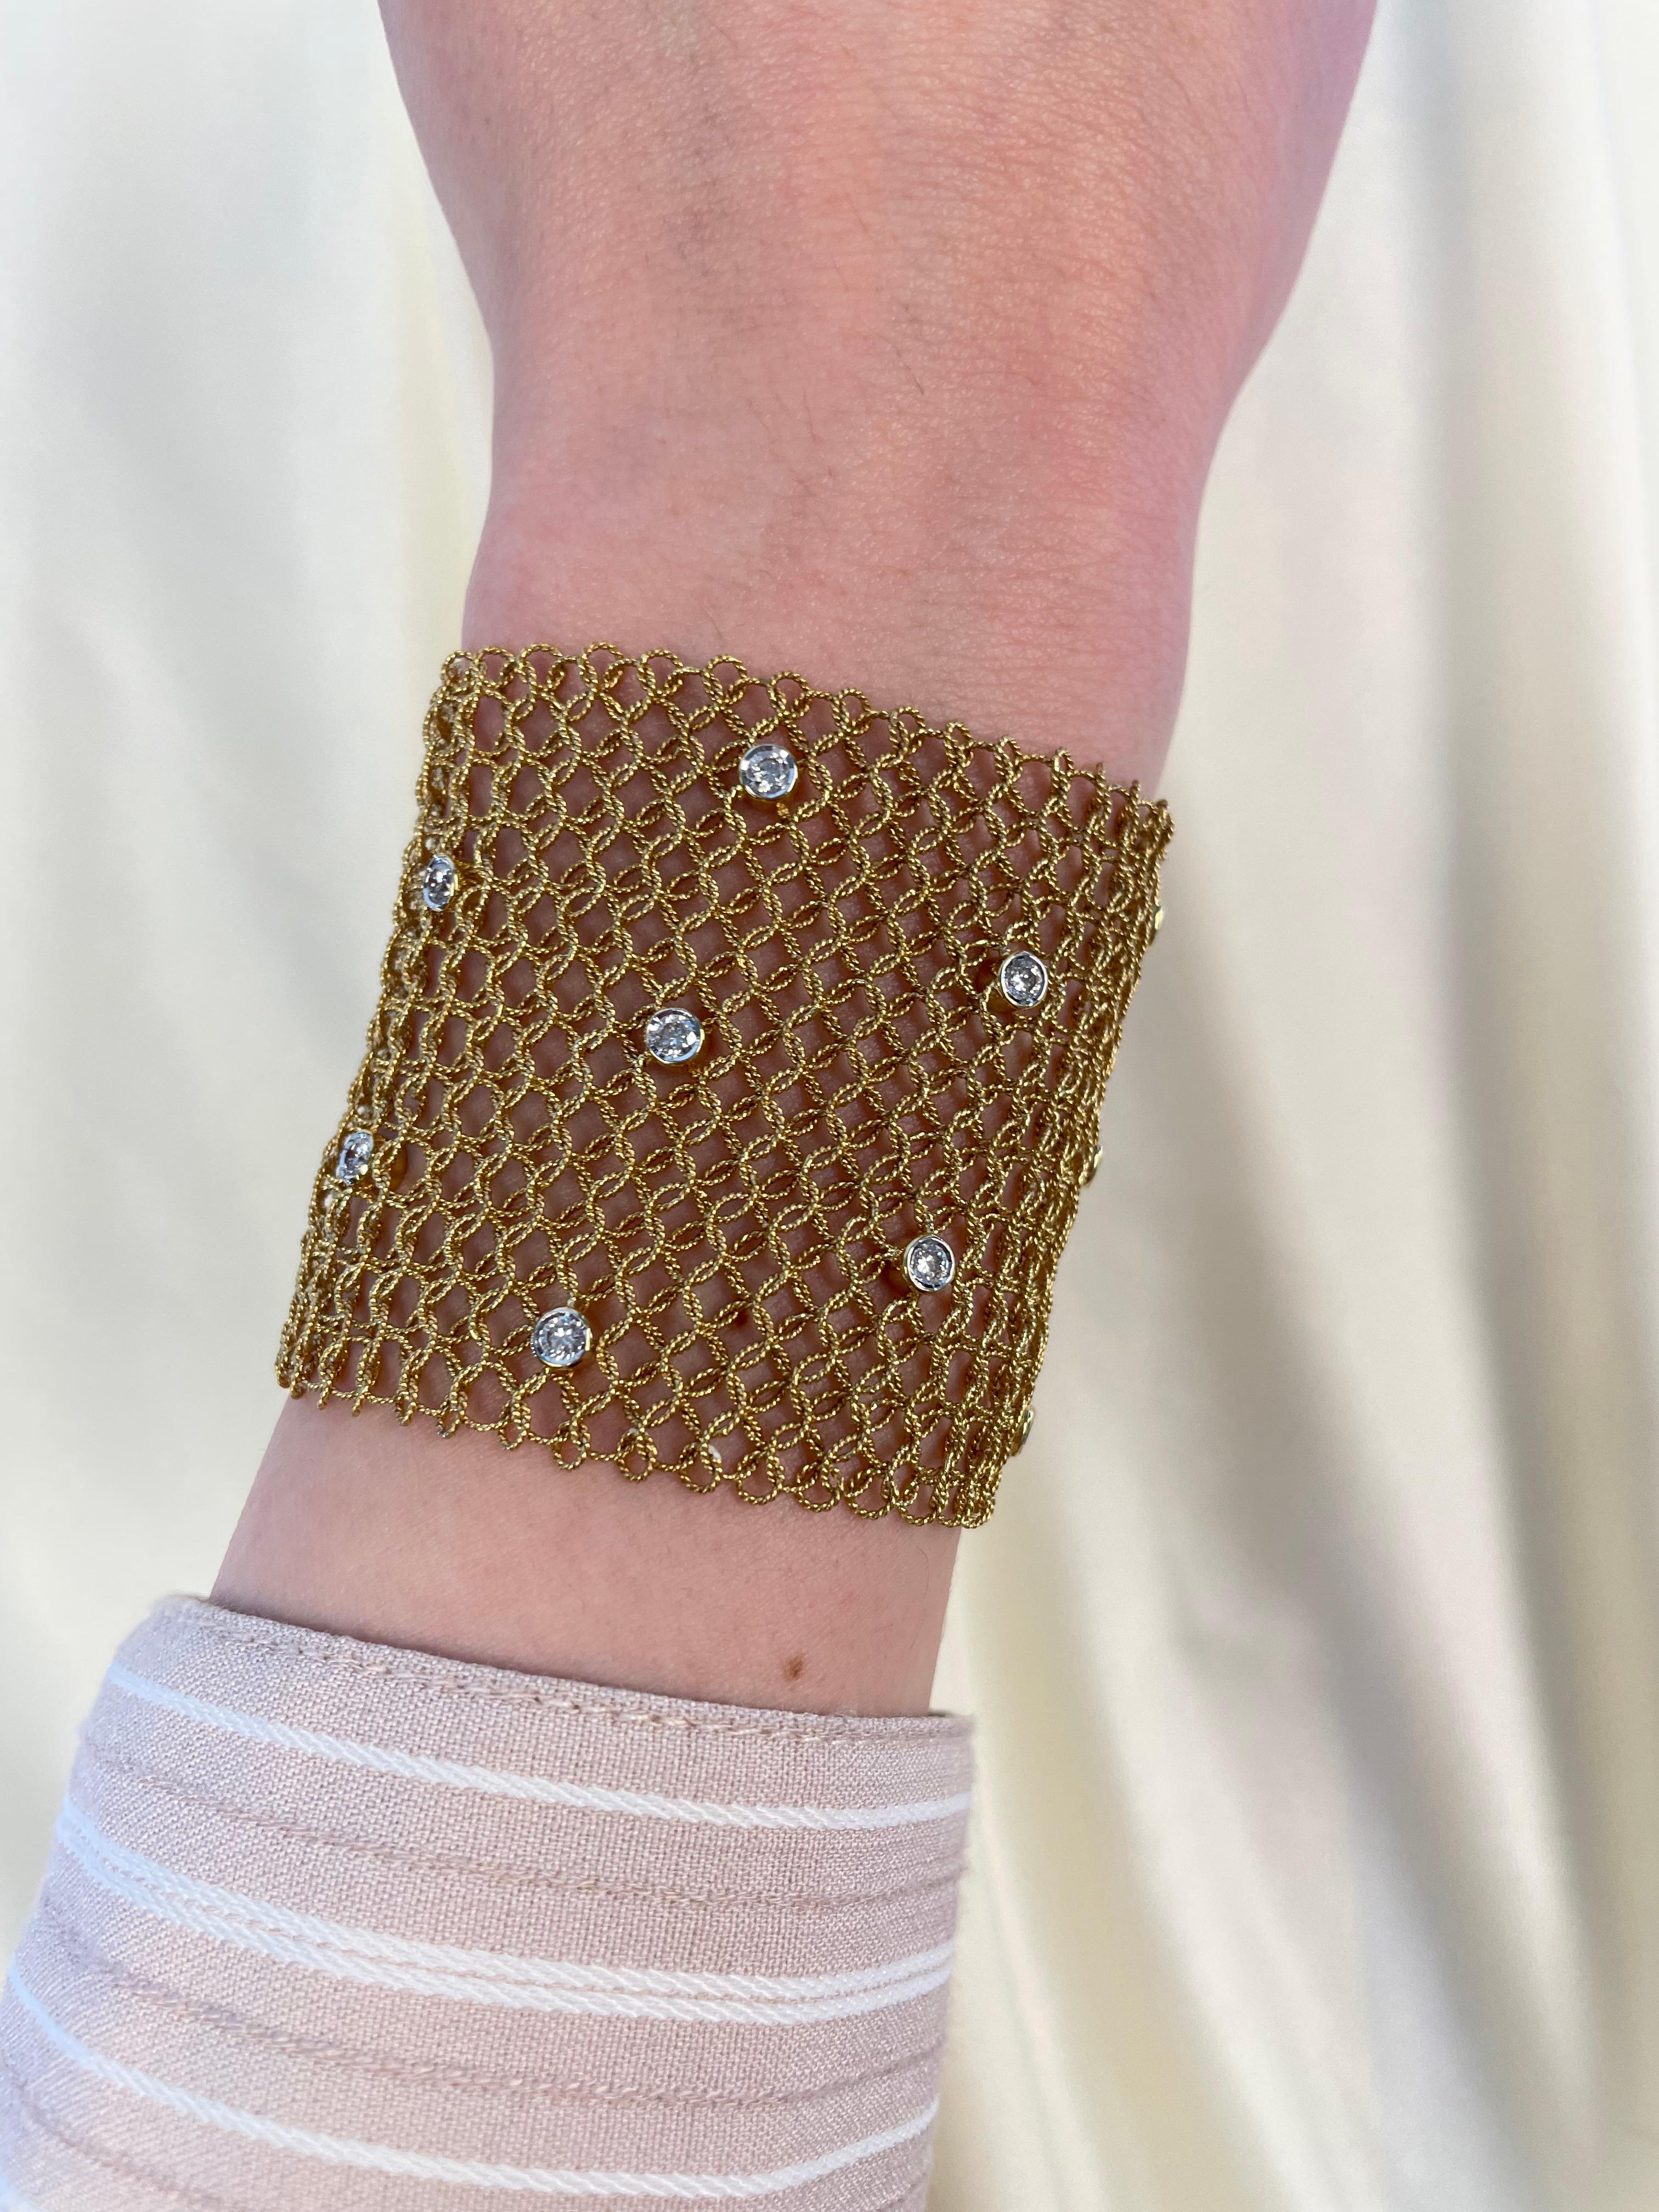 Stunning Italian made yellow gold and diamond lace bracelet.
24 round brilliant diamonds, 2.40 carats, G/H color and VS clarity. 18k yellow gold, 7 inches. 
Accommodated with an up-to-date appraisal by a GIA G.G. once purchased, upon request. Please